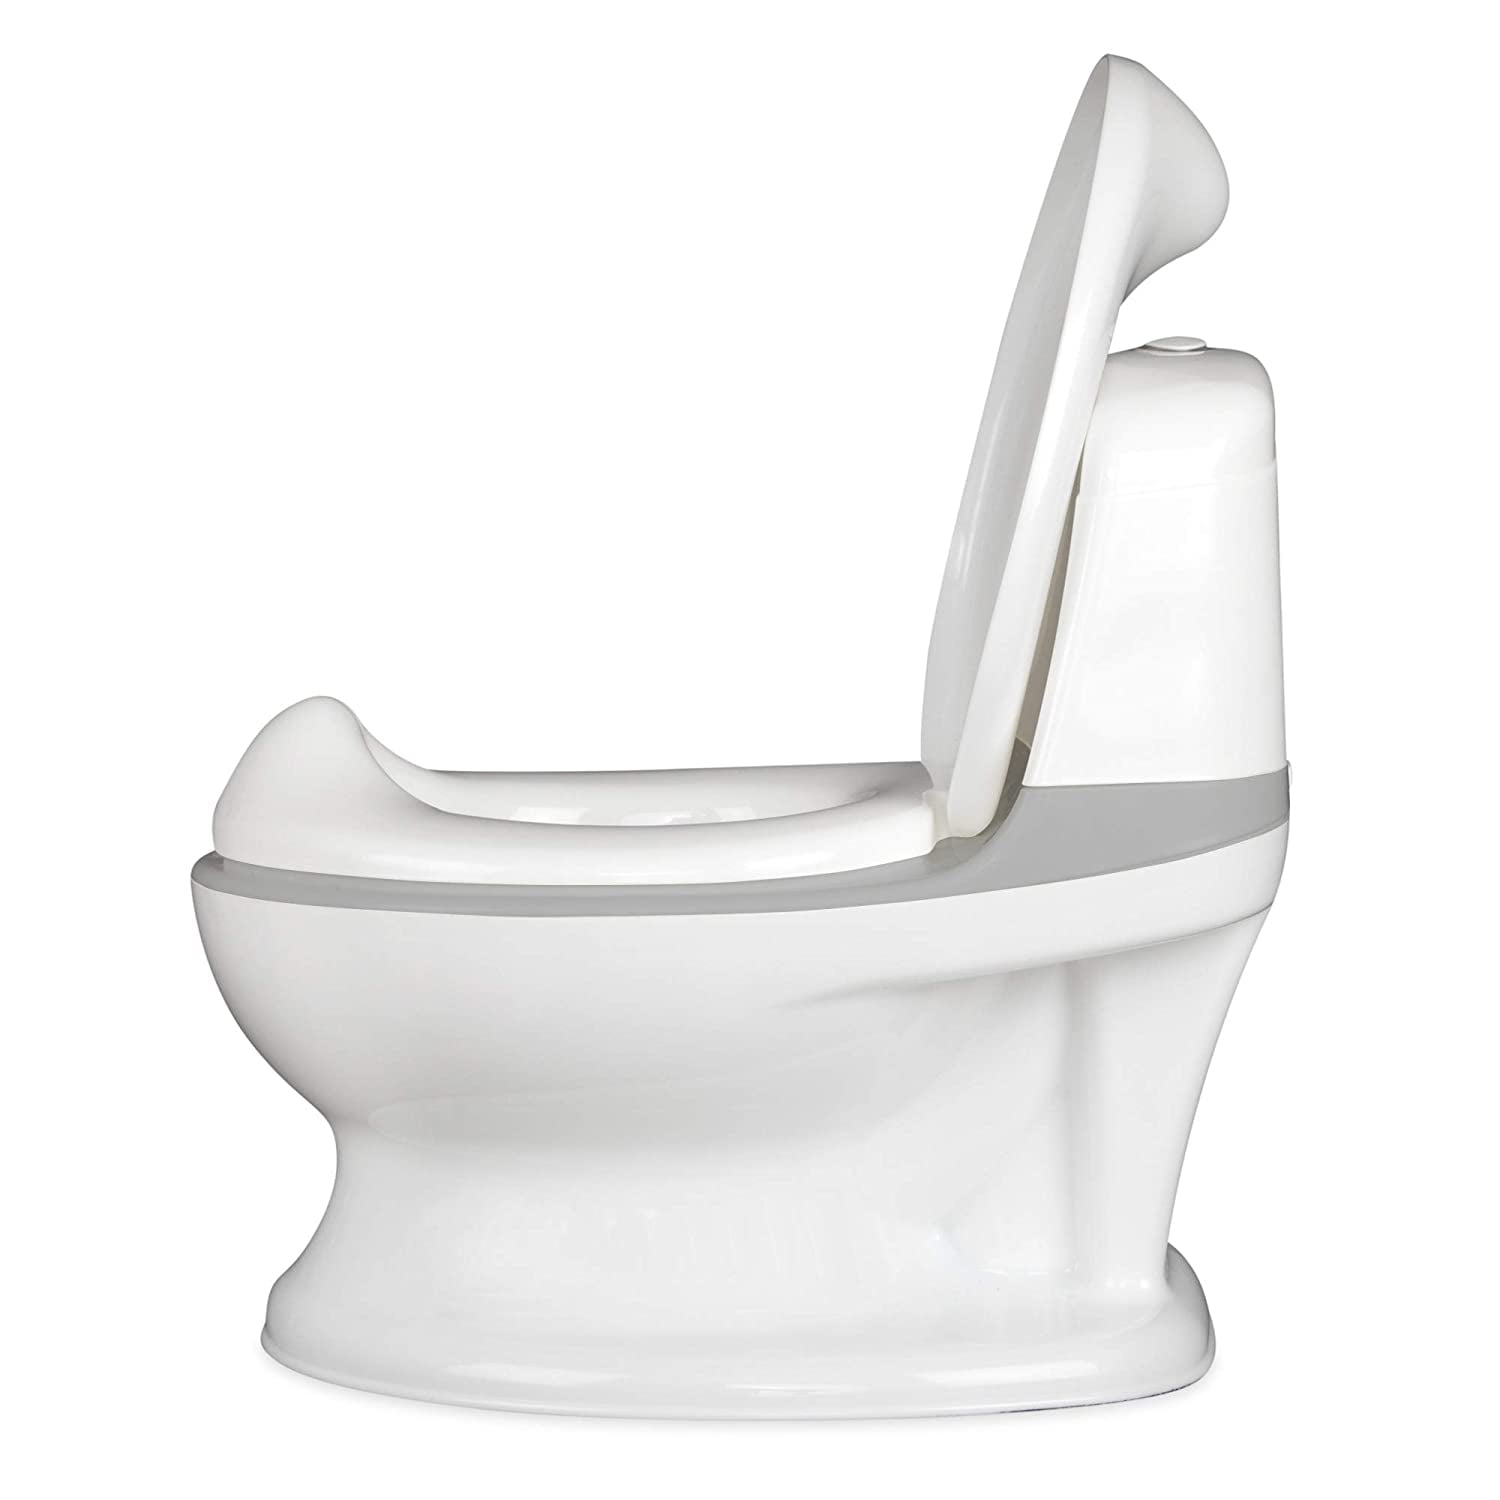 Nuby My Real Potty Training Toilet with Life-Like Flush Button & Sound for  Toddlers & Kids, White/gray 